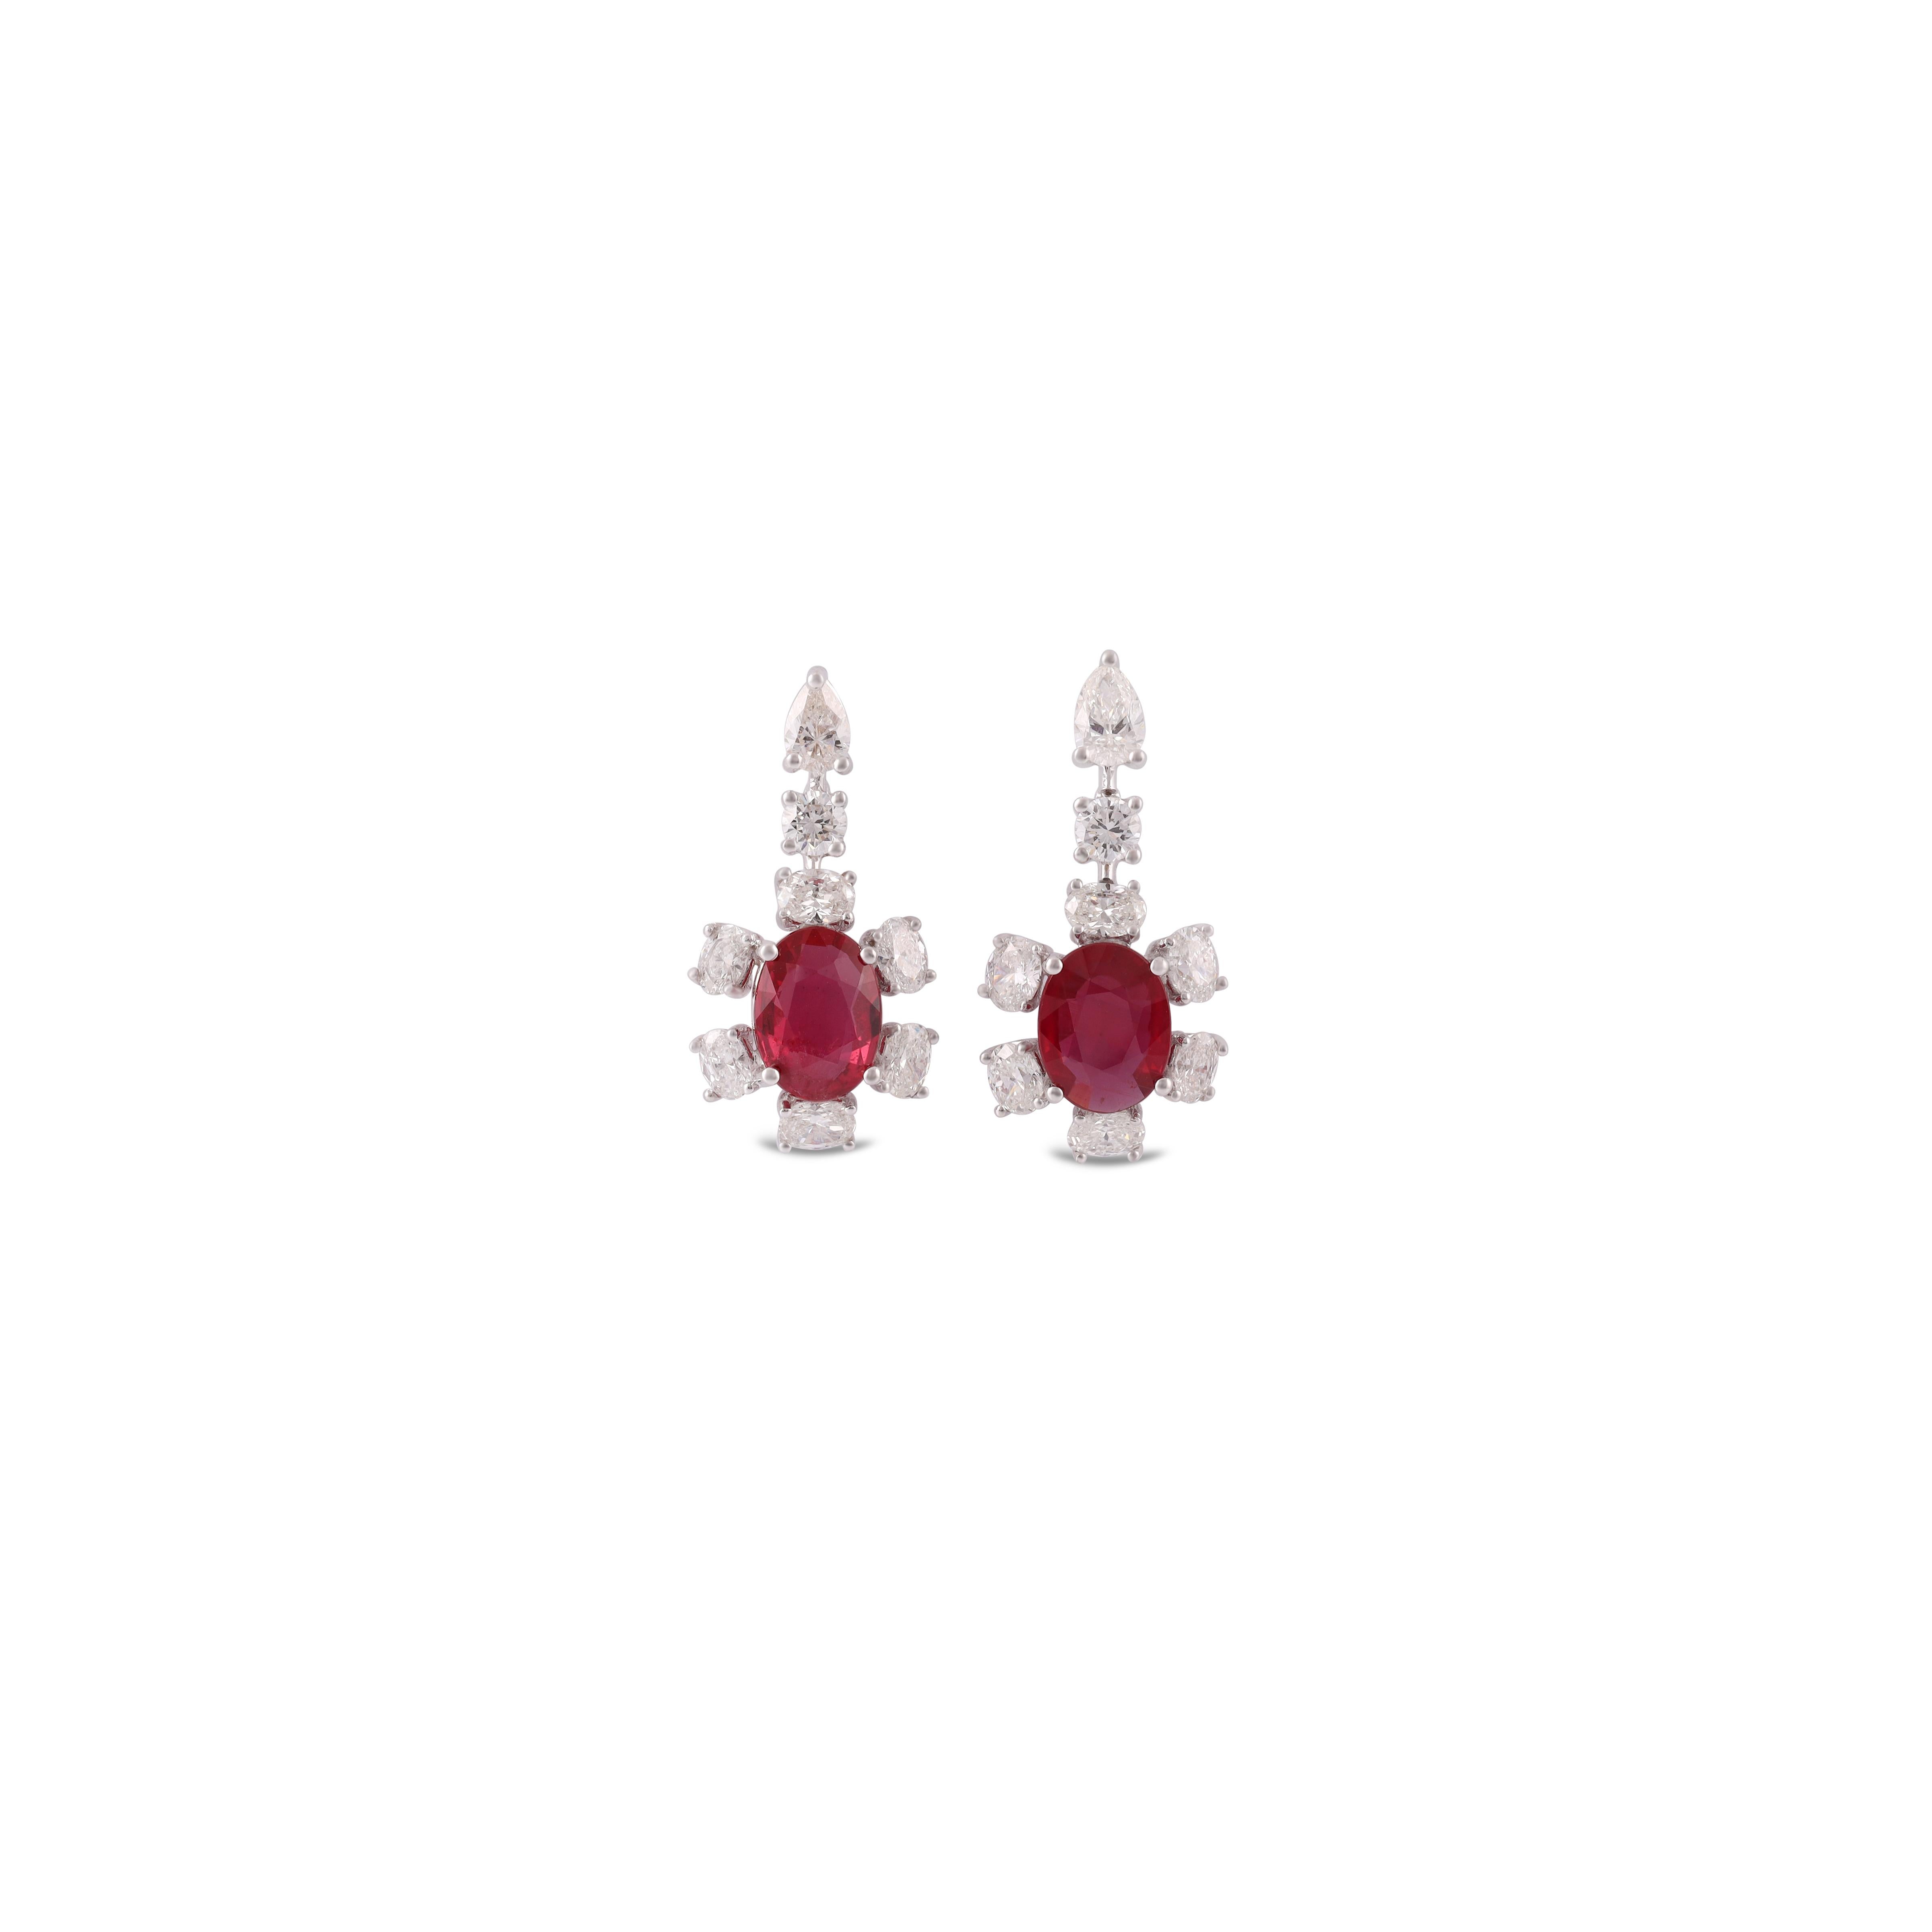 This is an elegant Natural Mozambique Pigeon Blood Ruby & diamond Earring studded in 18k White gold with 2 piece of oval Cut  shaped Mozambique Ruby weight 2.32 carat With 14 pieces of round shaped diamonds weight 1.67 carat, & 2 pieces of Pear